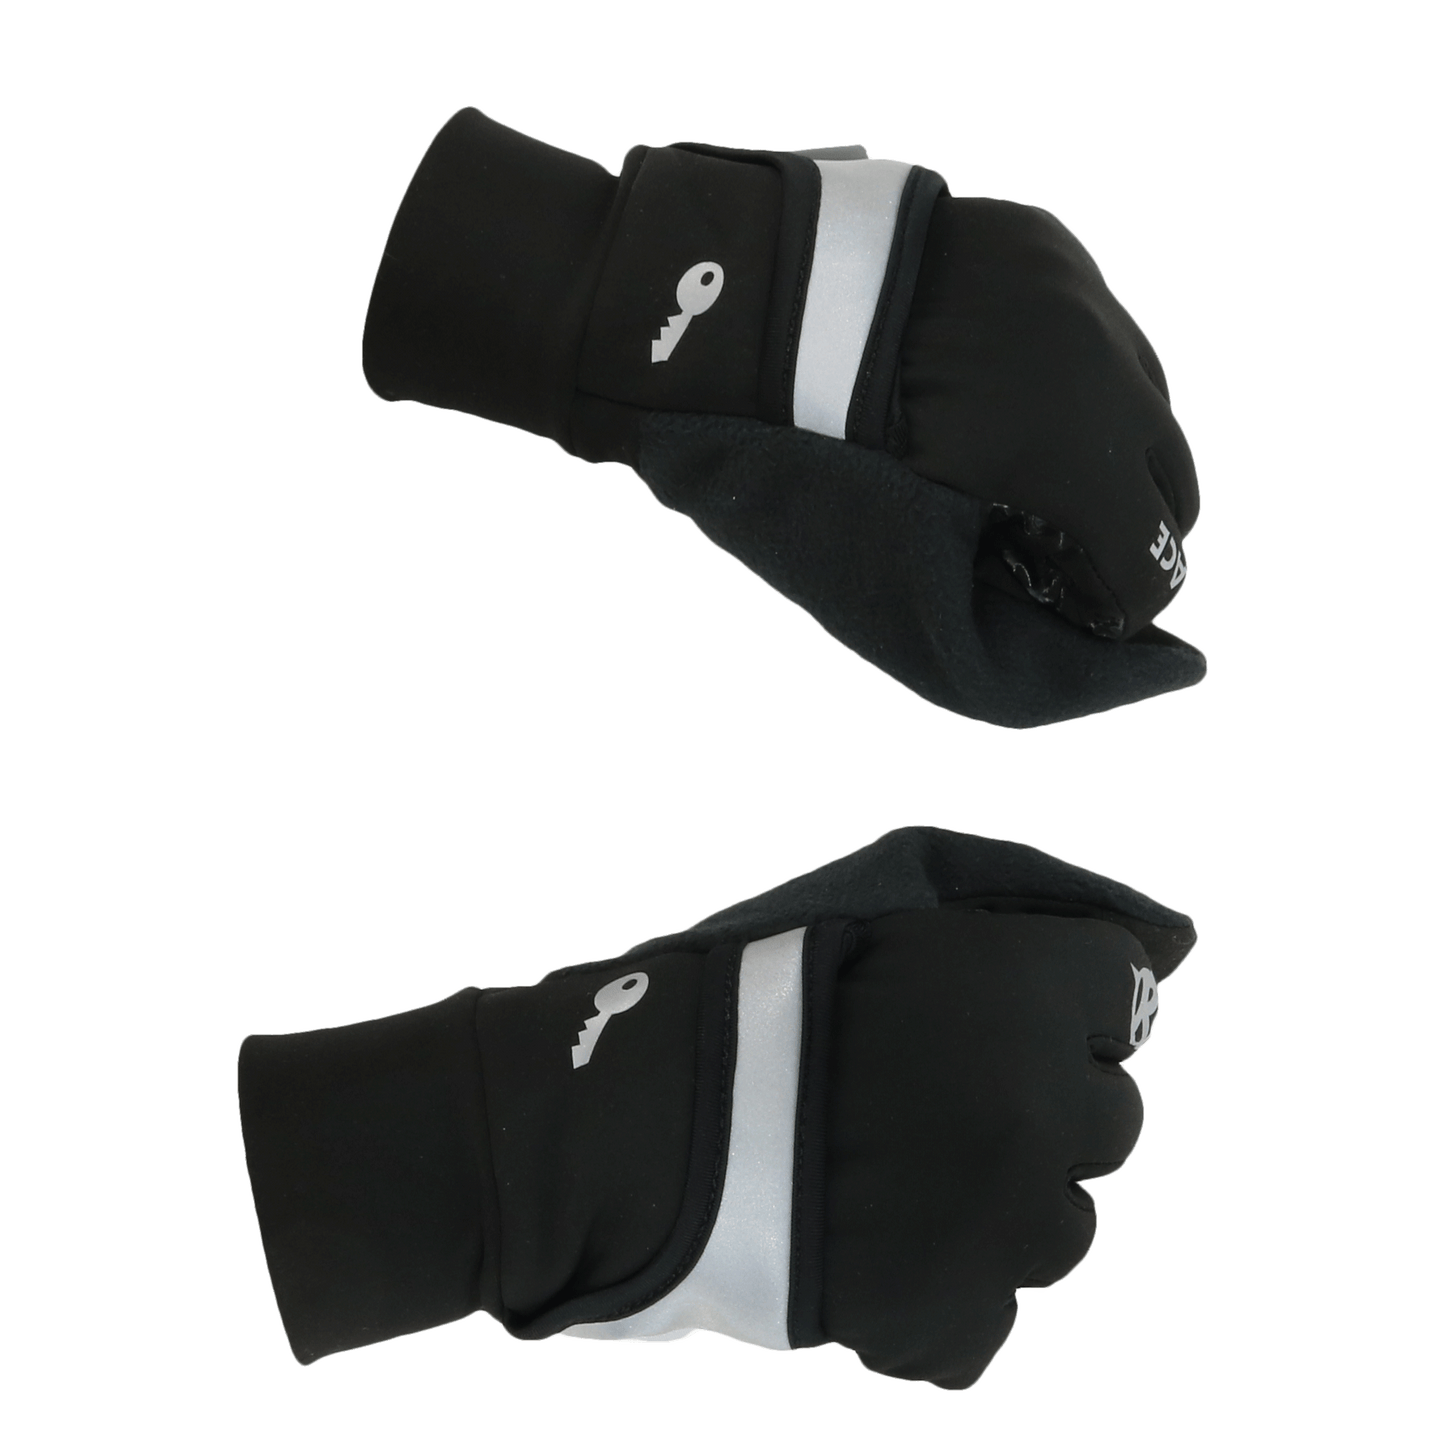 Rat Race Sea to Summit Glove - with pull-out mitt